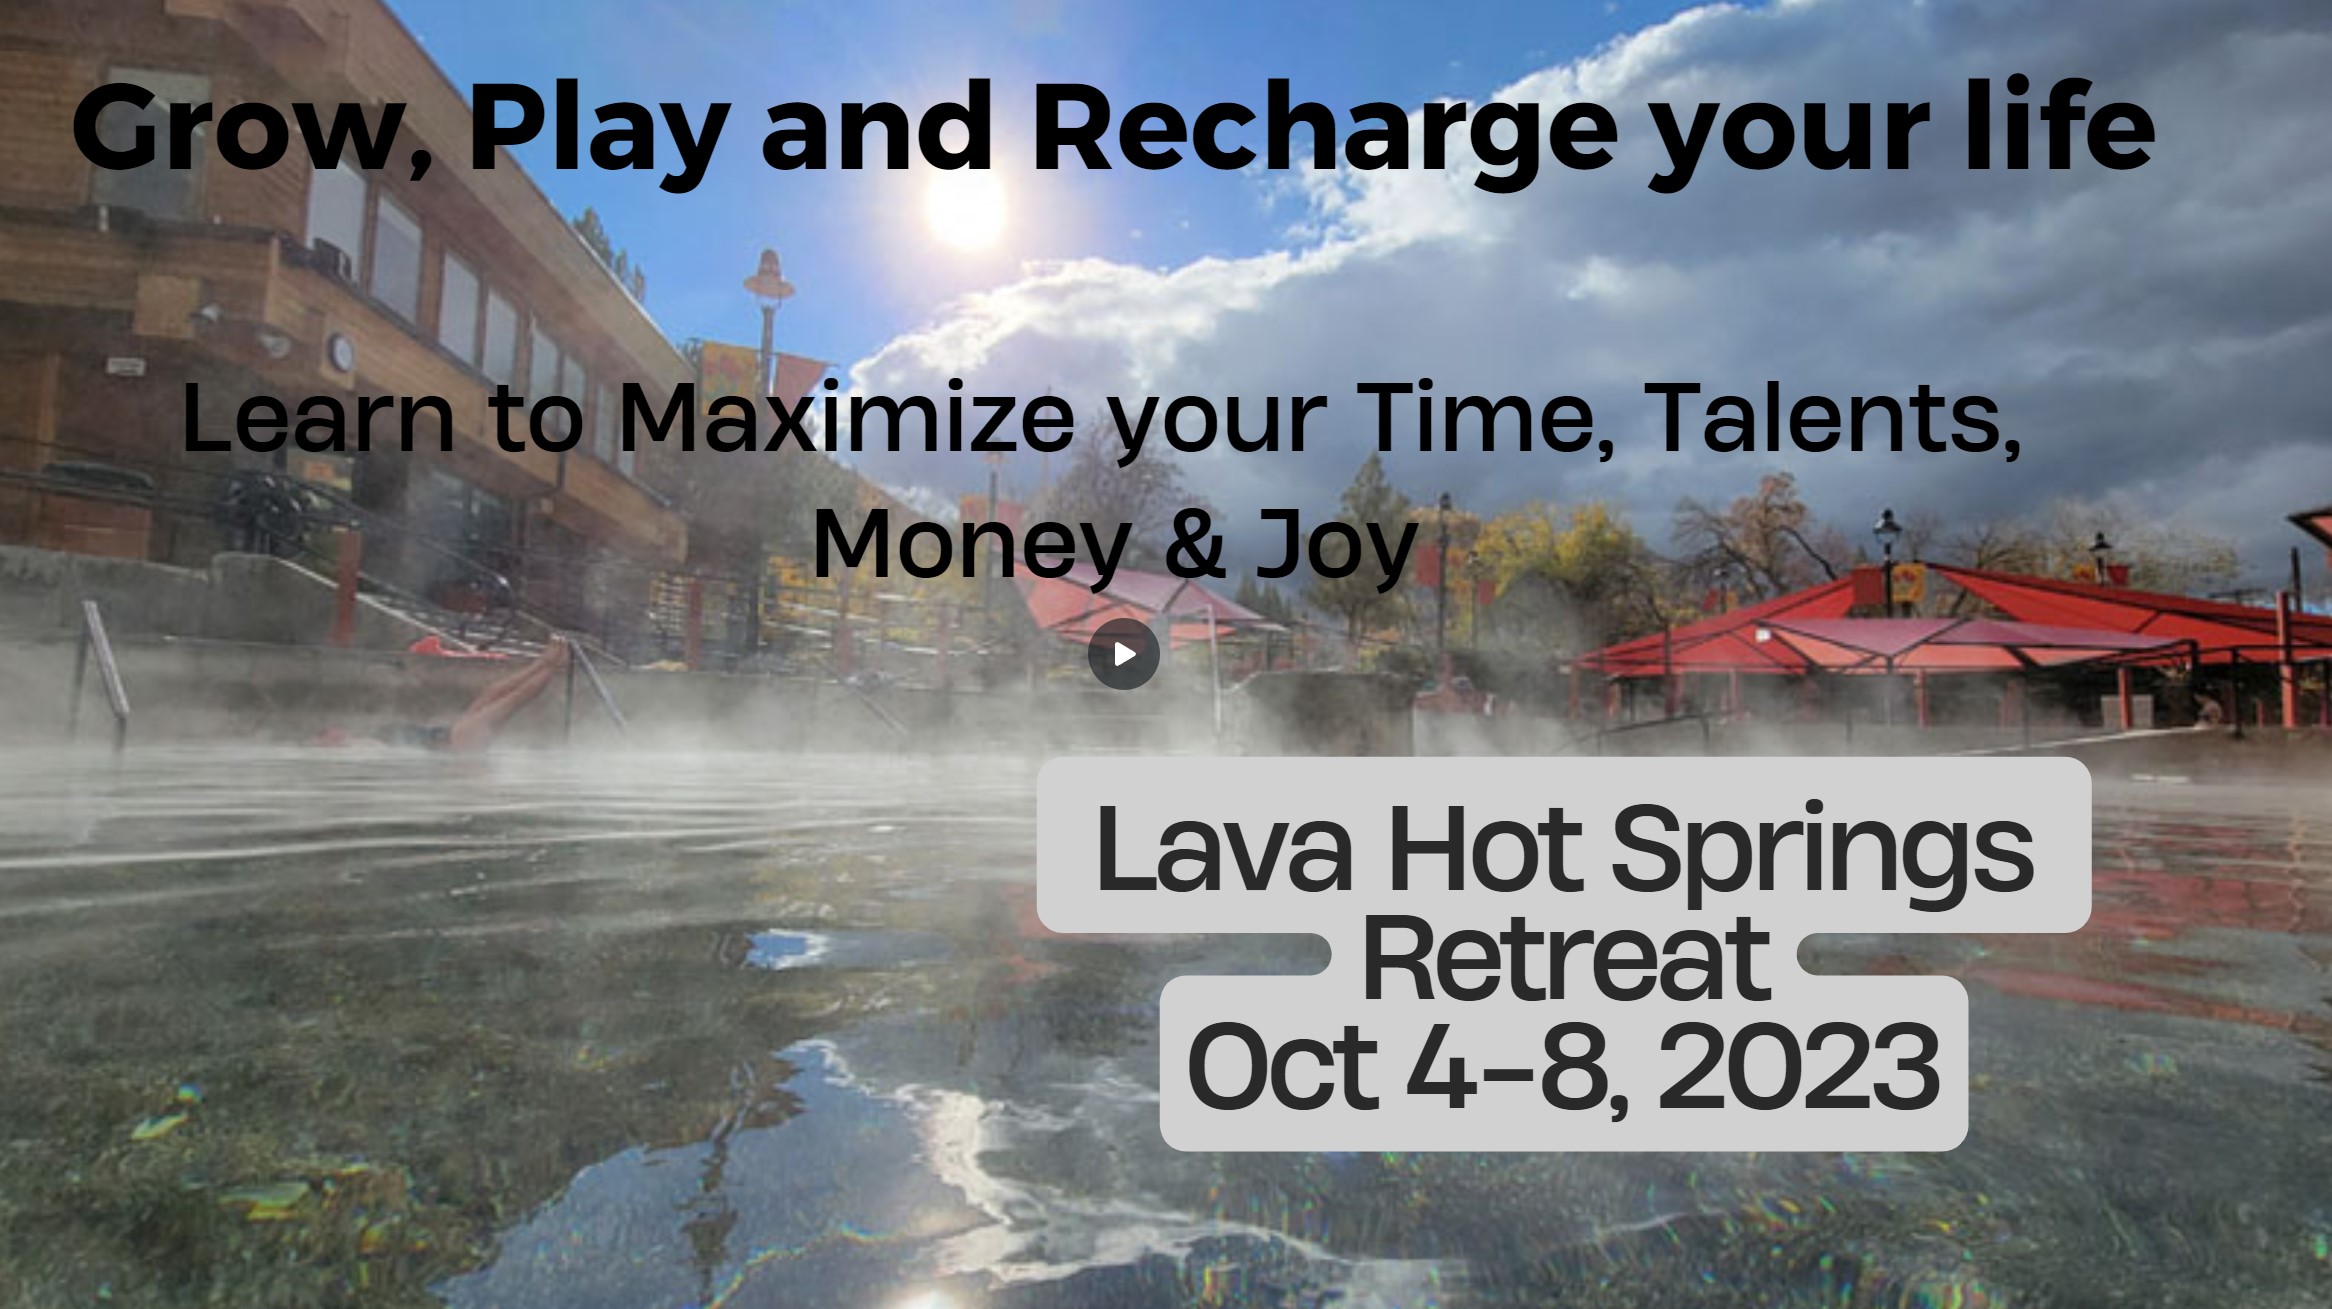 click to view video with retreat info for Lava Hot Springs Oct 2023